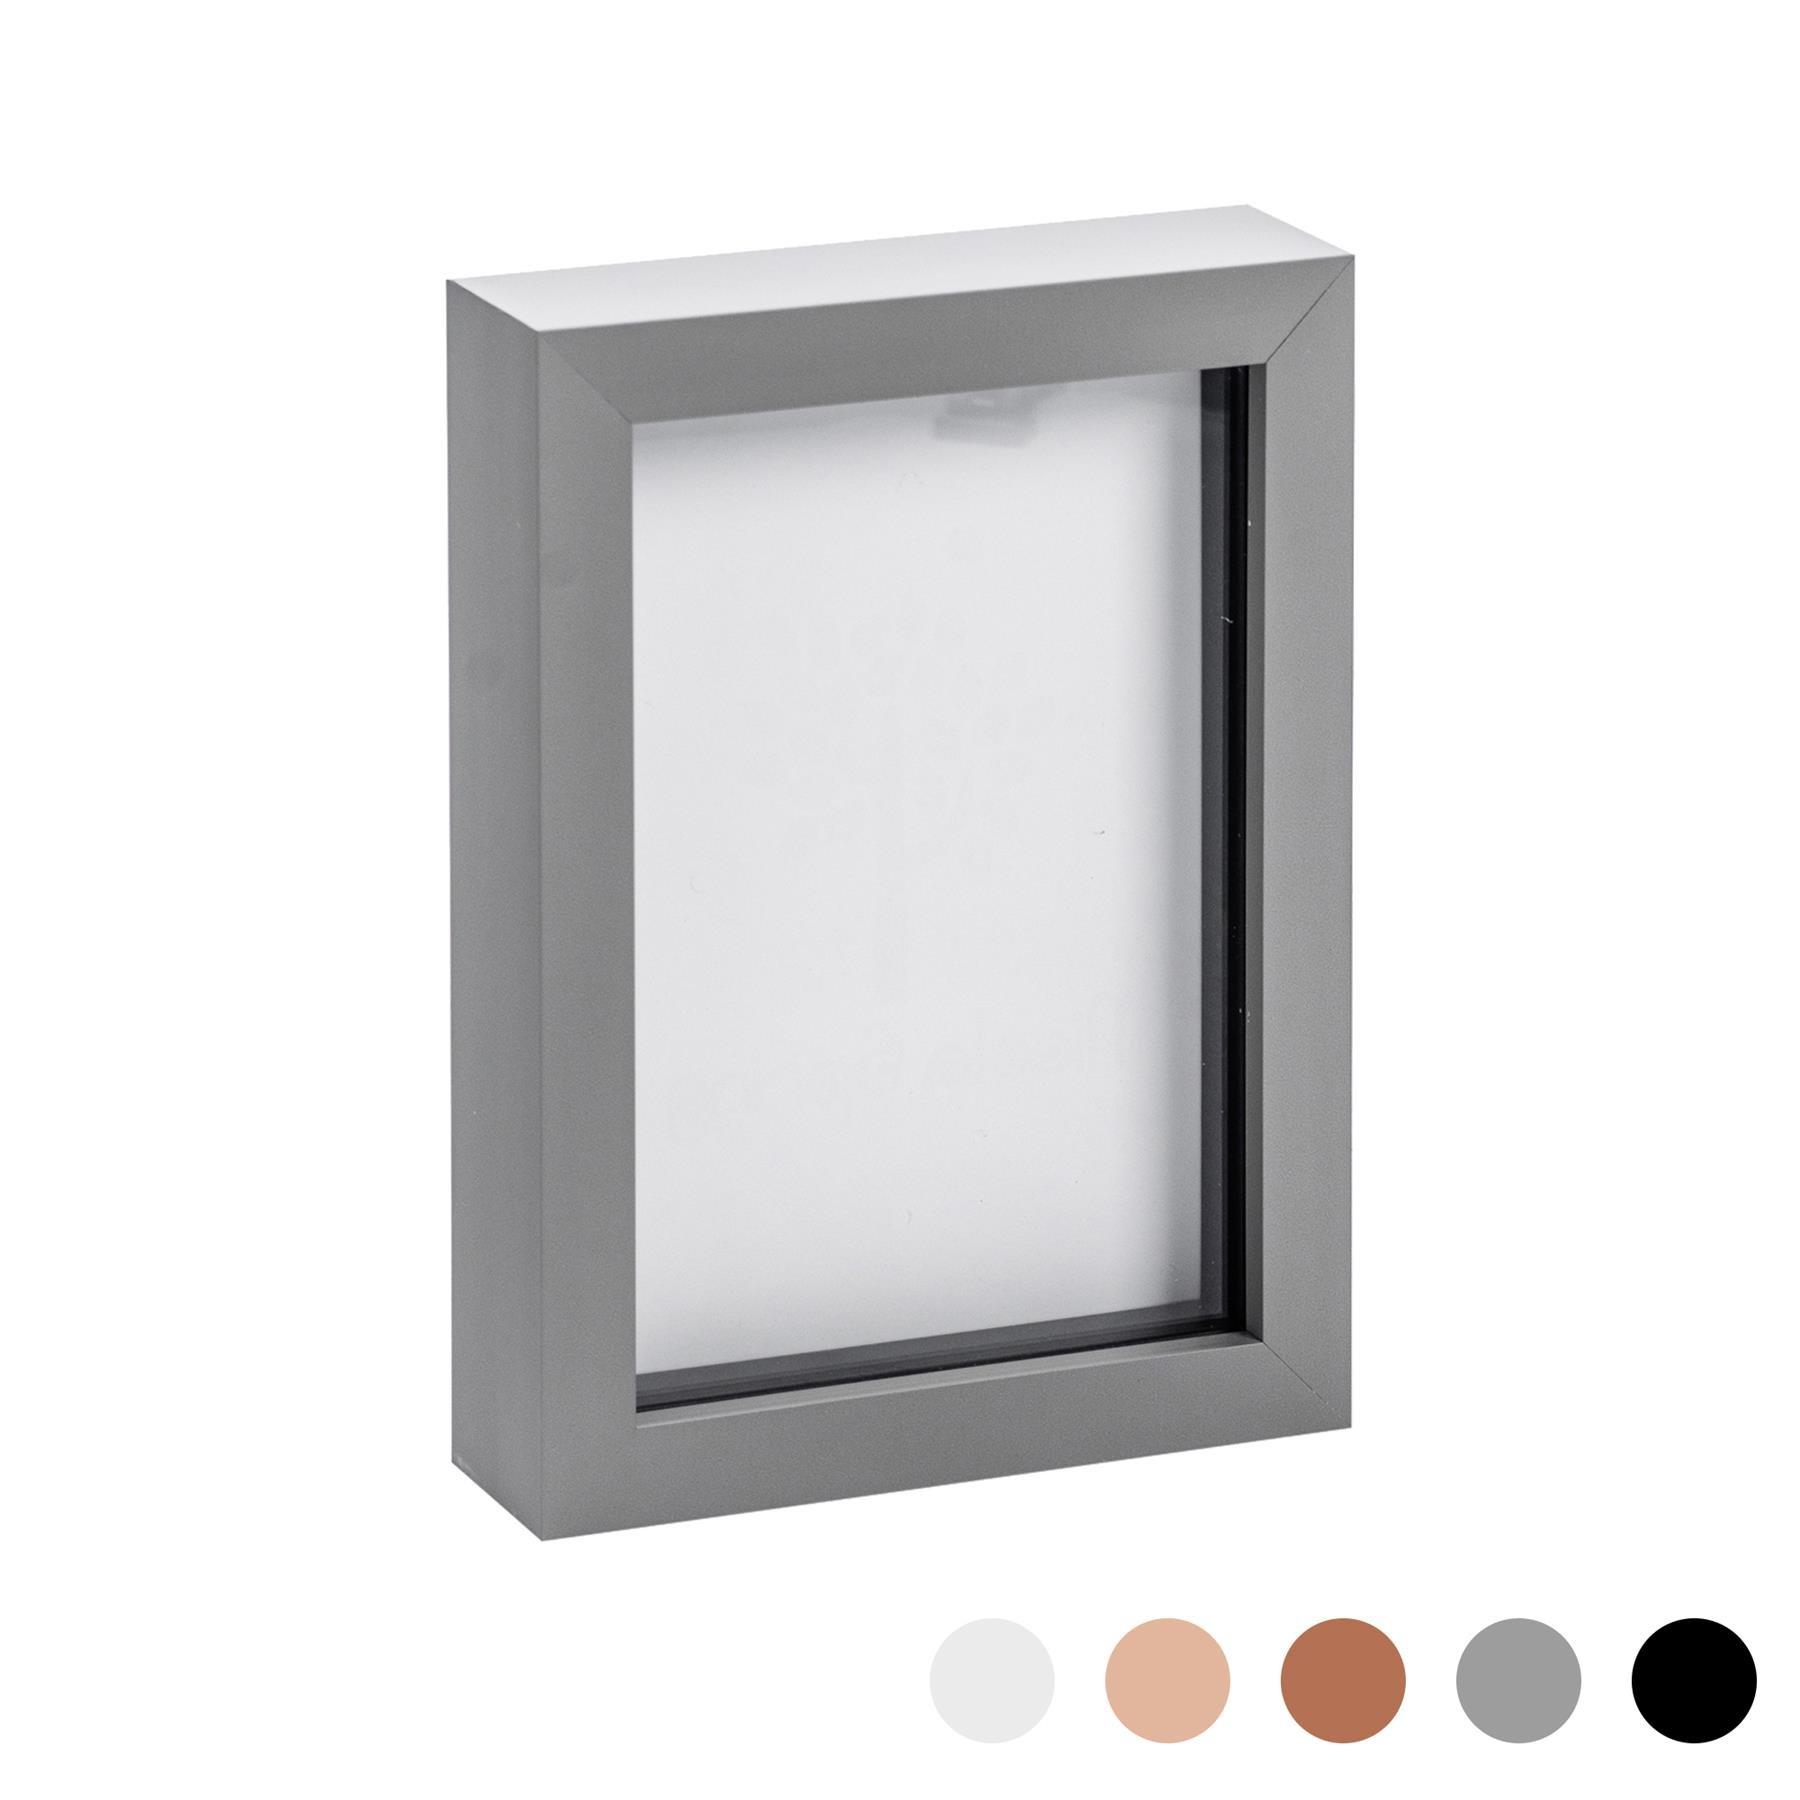 Picture Frame gray